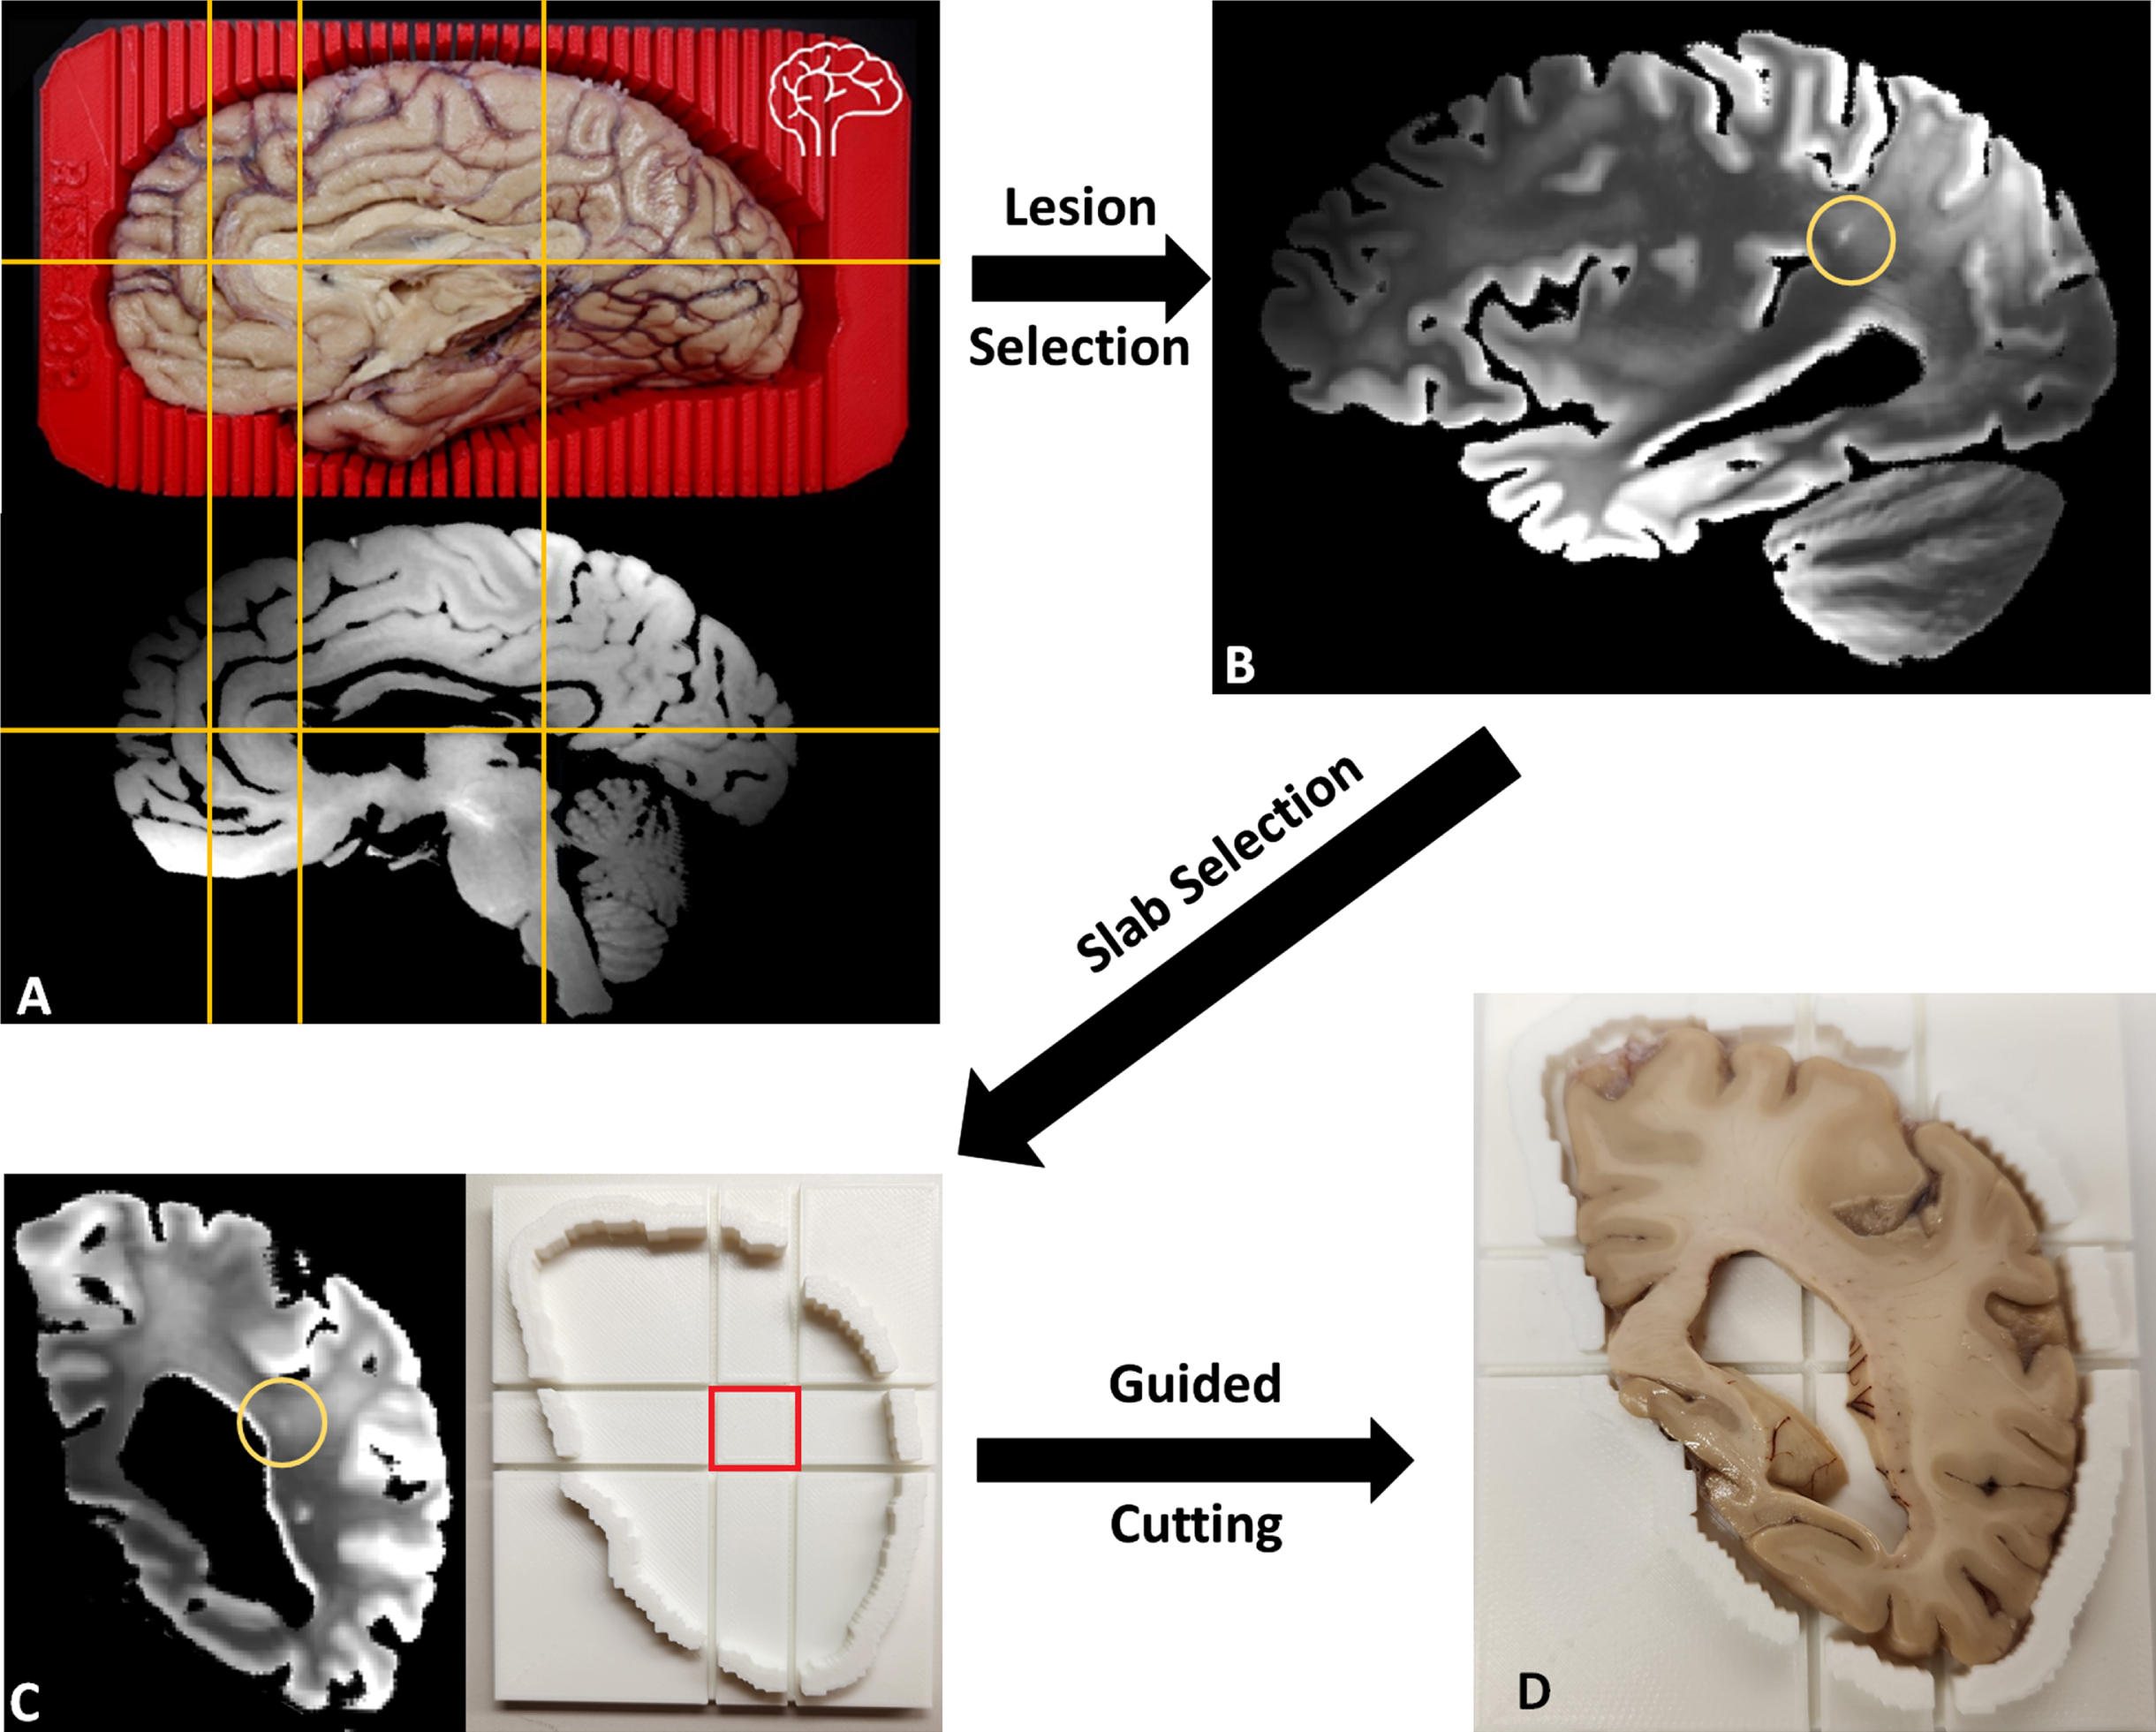 A) Left cerebral hemisphere prepped for cutting inside of 3D-printed brain cutting guide created using surface scanning along with the corresponding T2 weighted MRI with fluid removed. Yellow lines included to show correspondence of MRI to actual brain. B) A lesion small to be easily missed without MR guidance was selected. C) The corresponding coronal MRI view (cutting plane) of the lesion (circled) with a slab cutting guide corresponding to the slab. D) Slab #22 of the brain fitted within the slab cutting guide with a small lesion near the center of the target block that can be sampled to examine the target lesion microscopically.